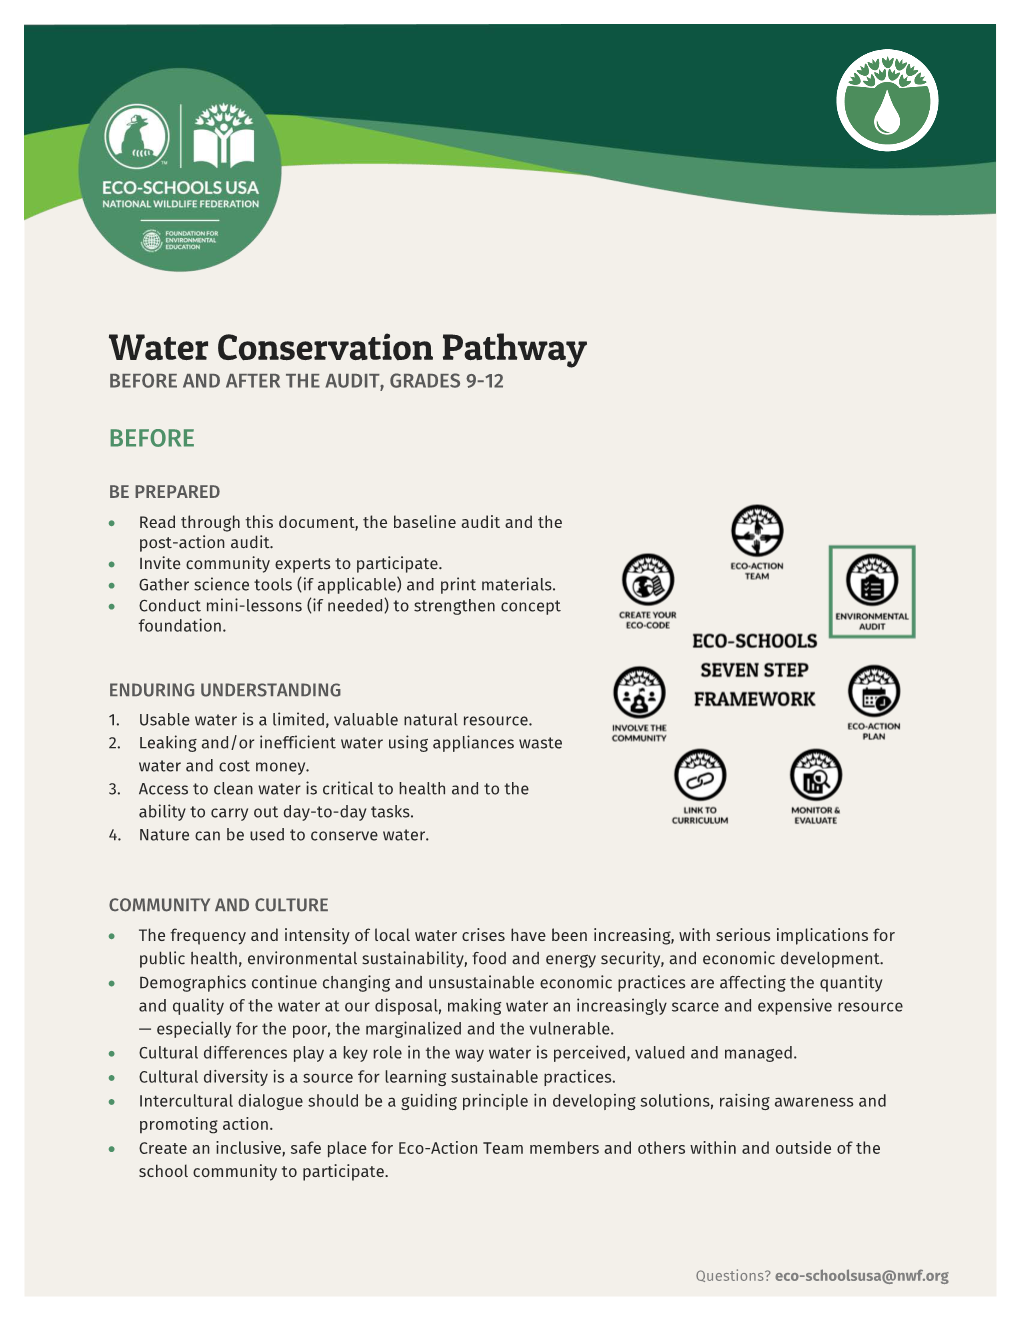 Water Conservation Pathway BEFORE and AFTER the AUDIT, GRADES 9-12